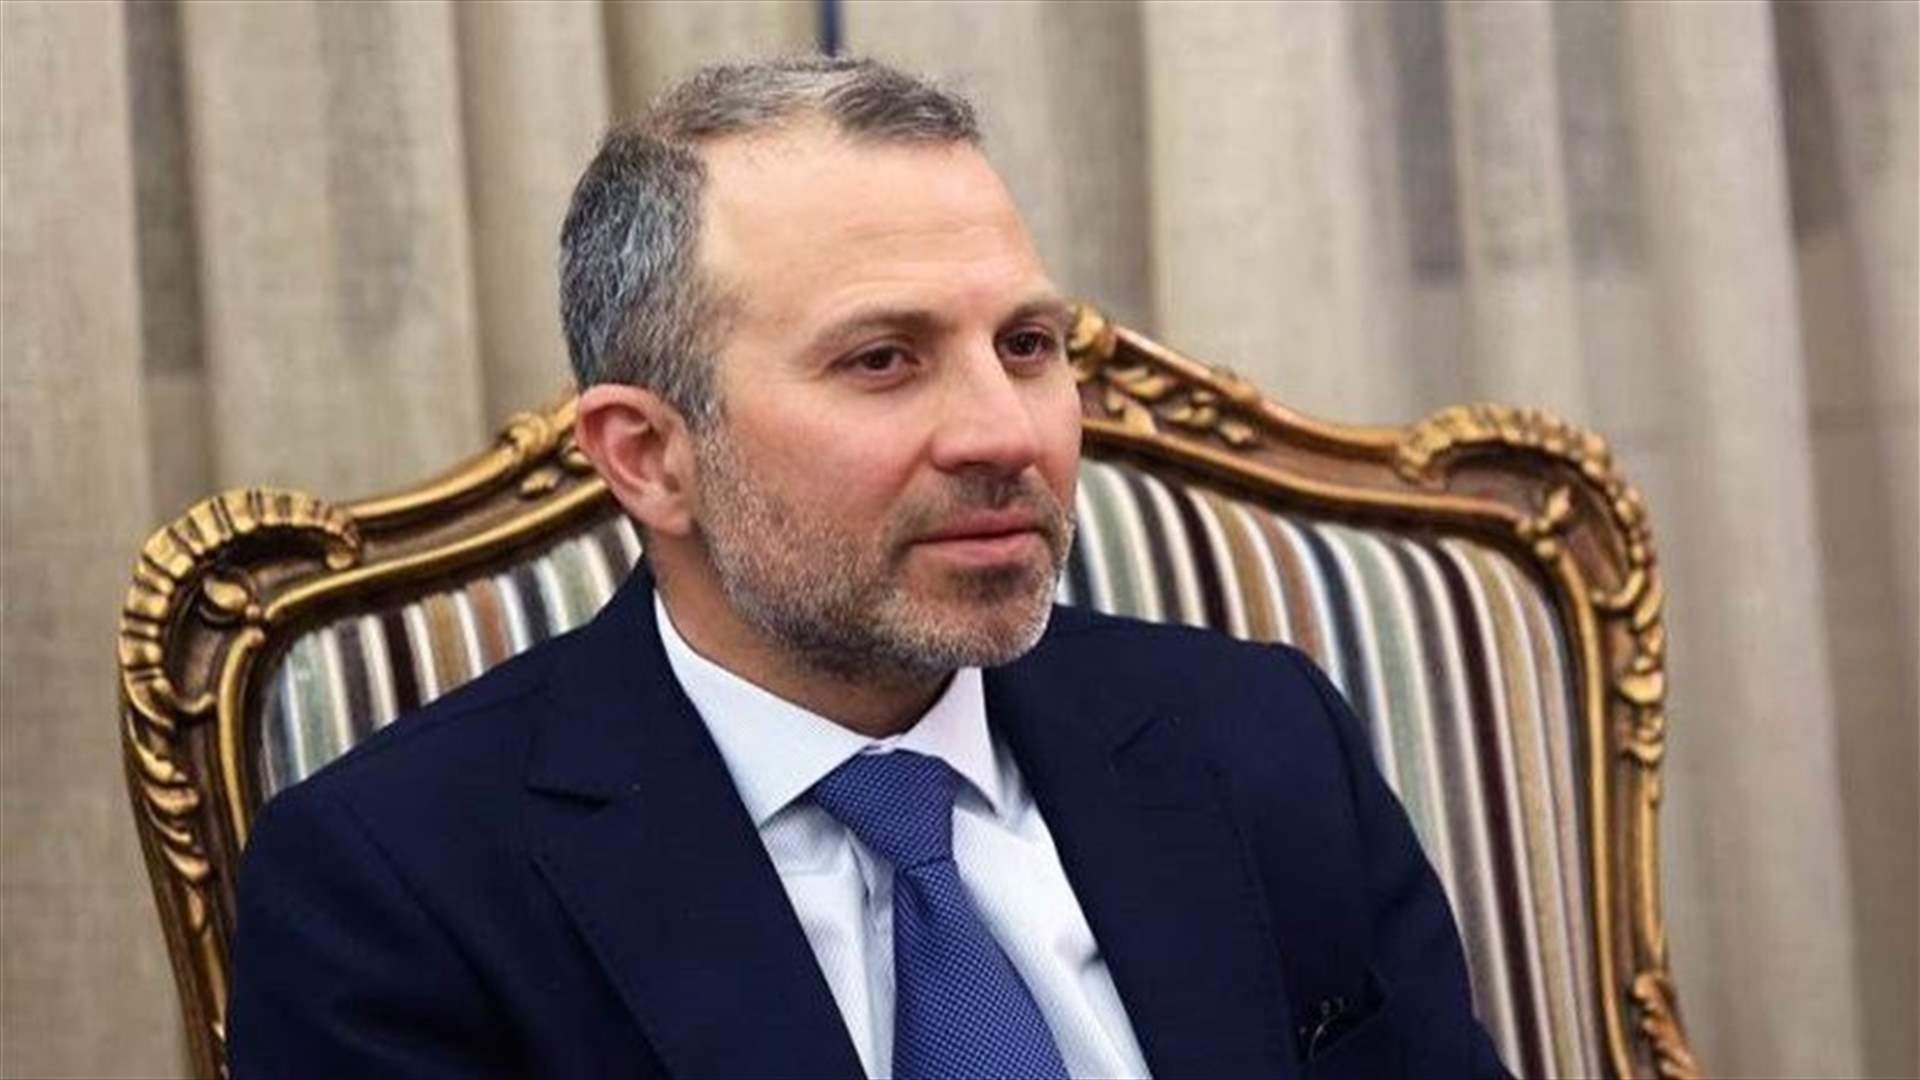 Bassil says consultations should begin on Monday, after which Safadi will be named PM